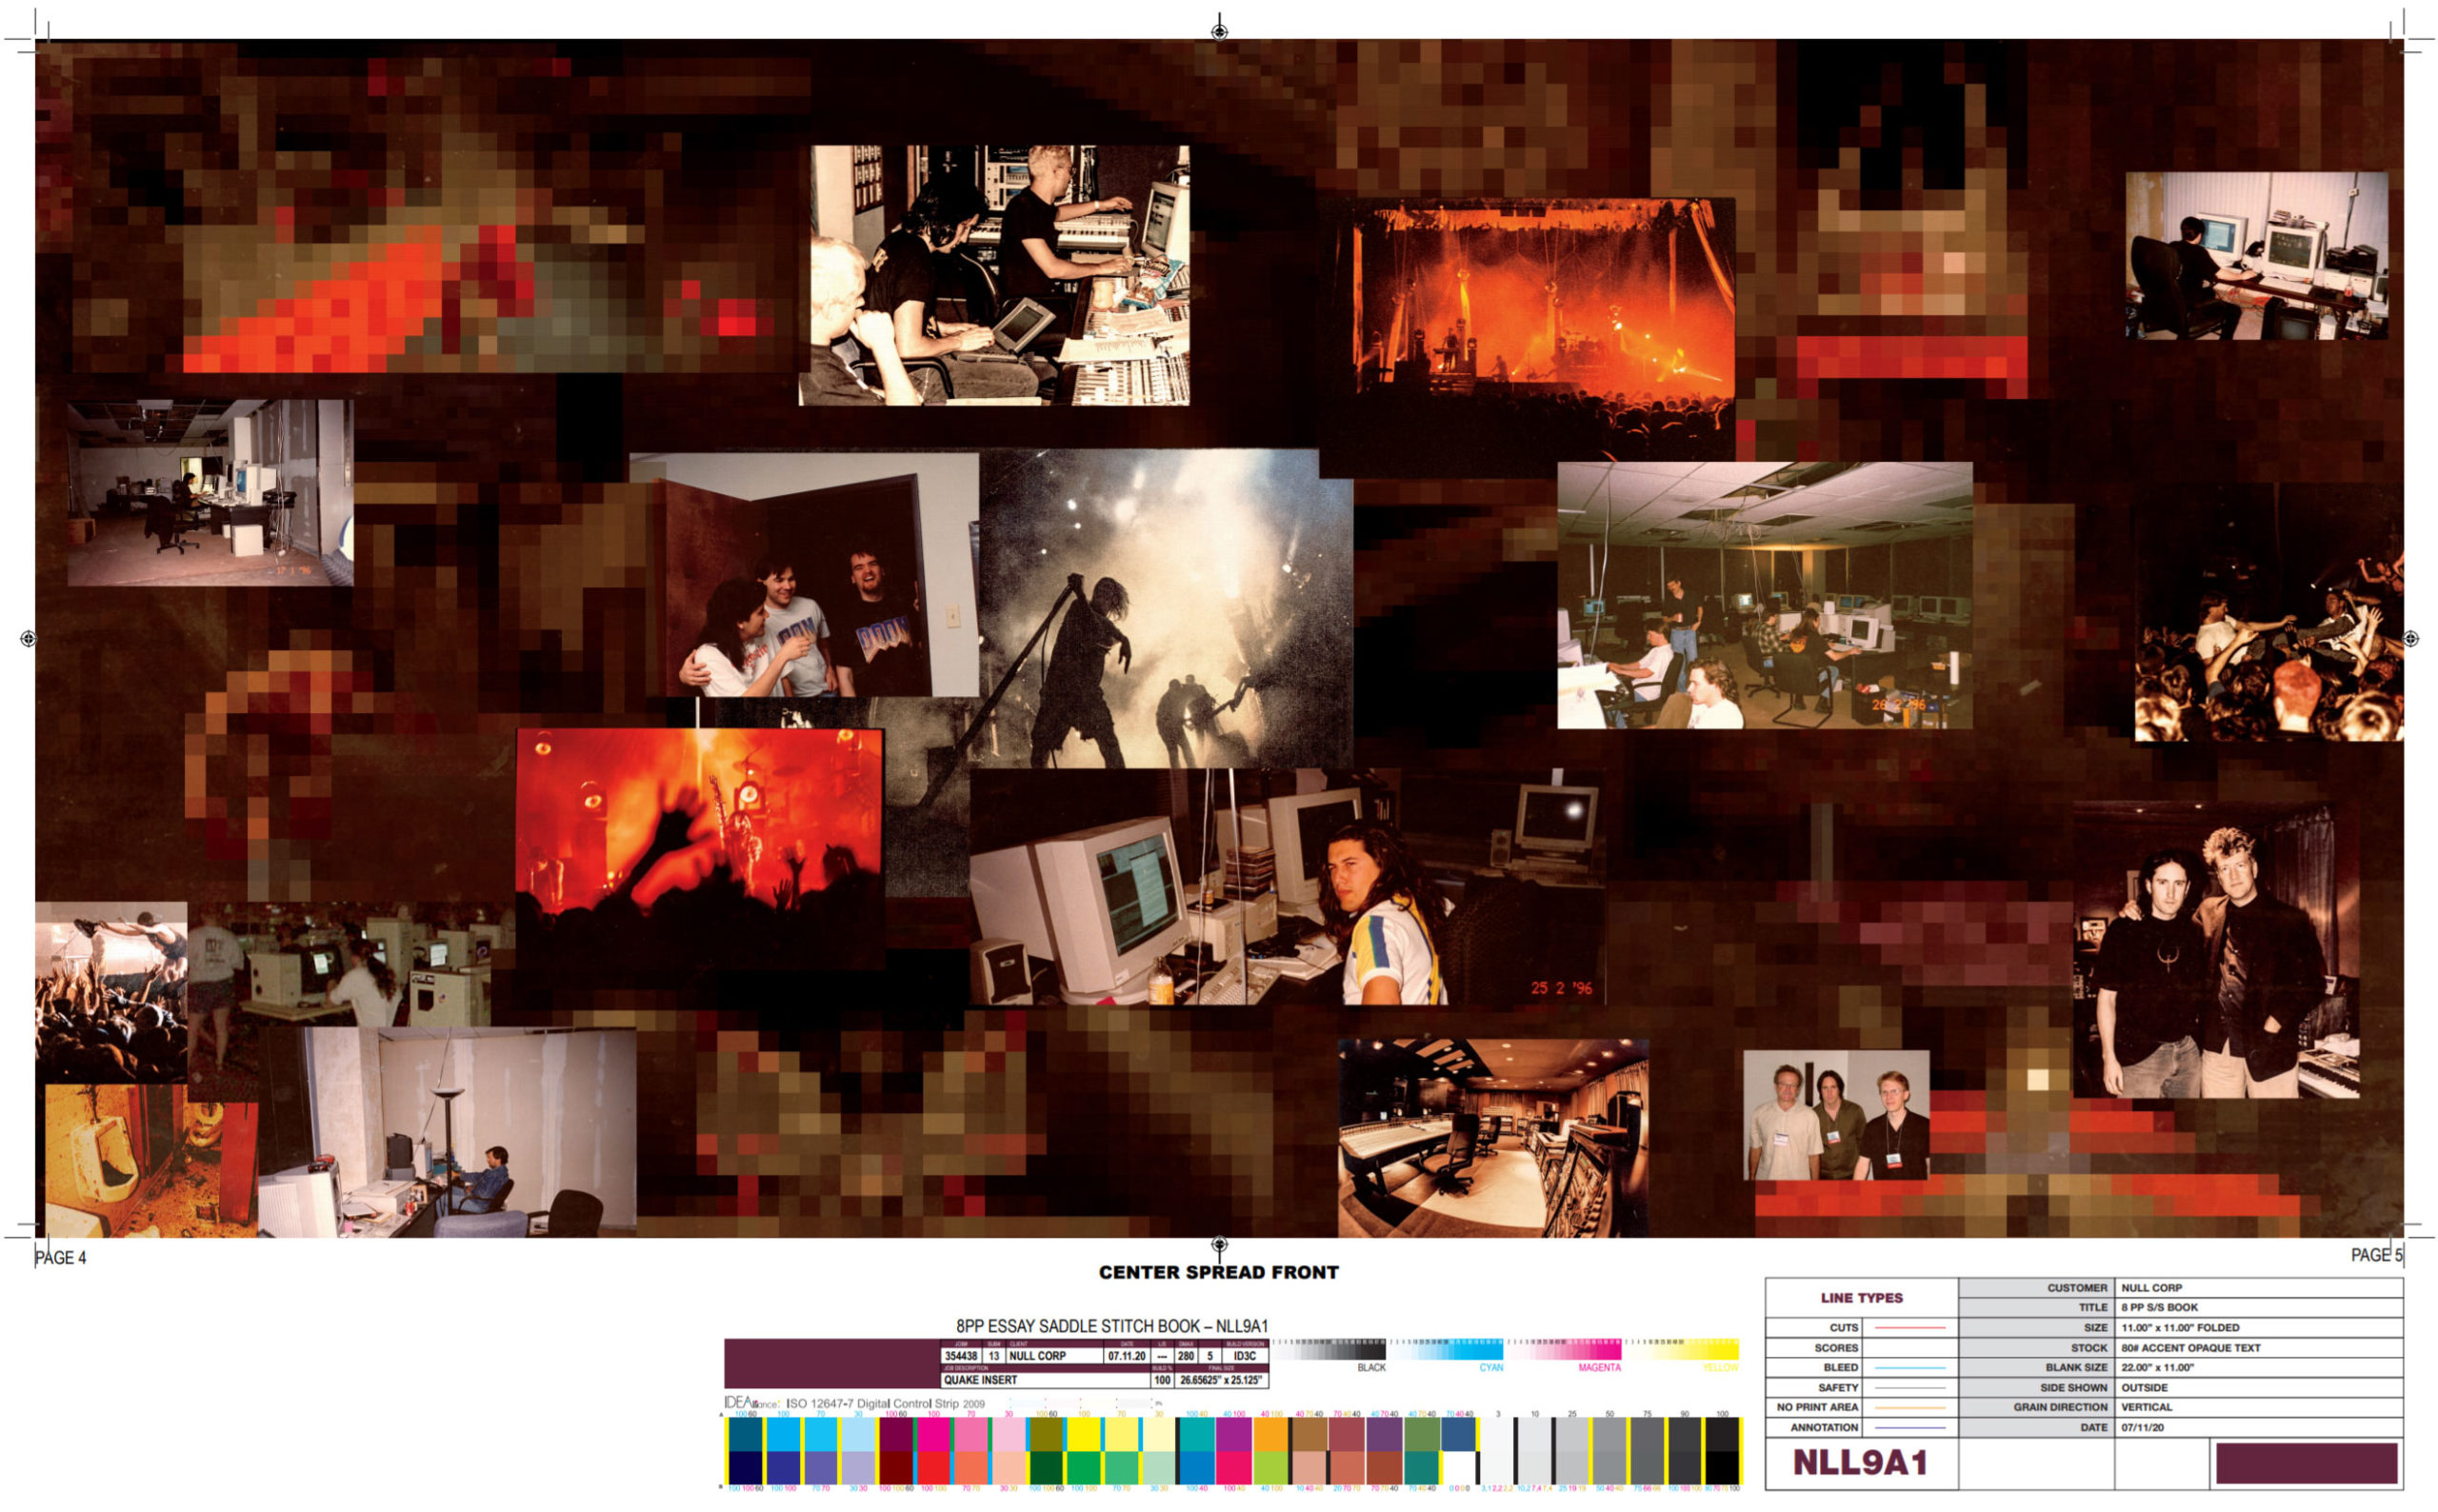 One of the pages of the now-removed booklet, showing a montage of scenes from both Quake's development and the creation of the game's soundtrack. (Image: Shopify)